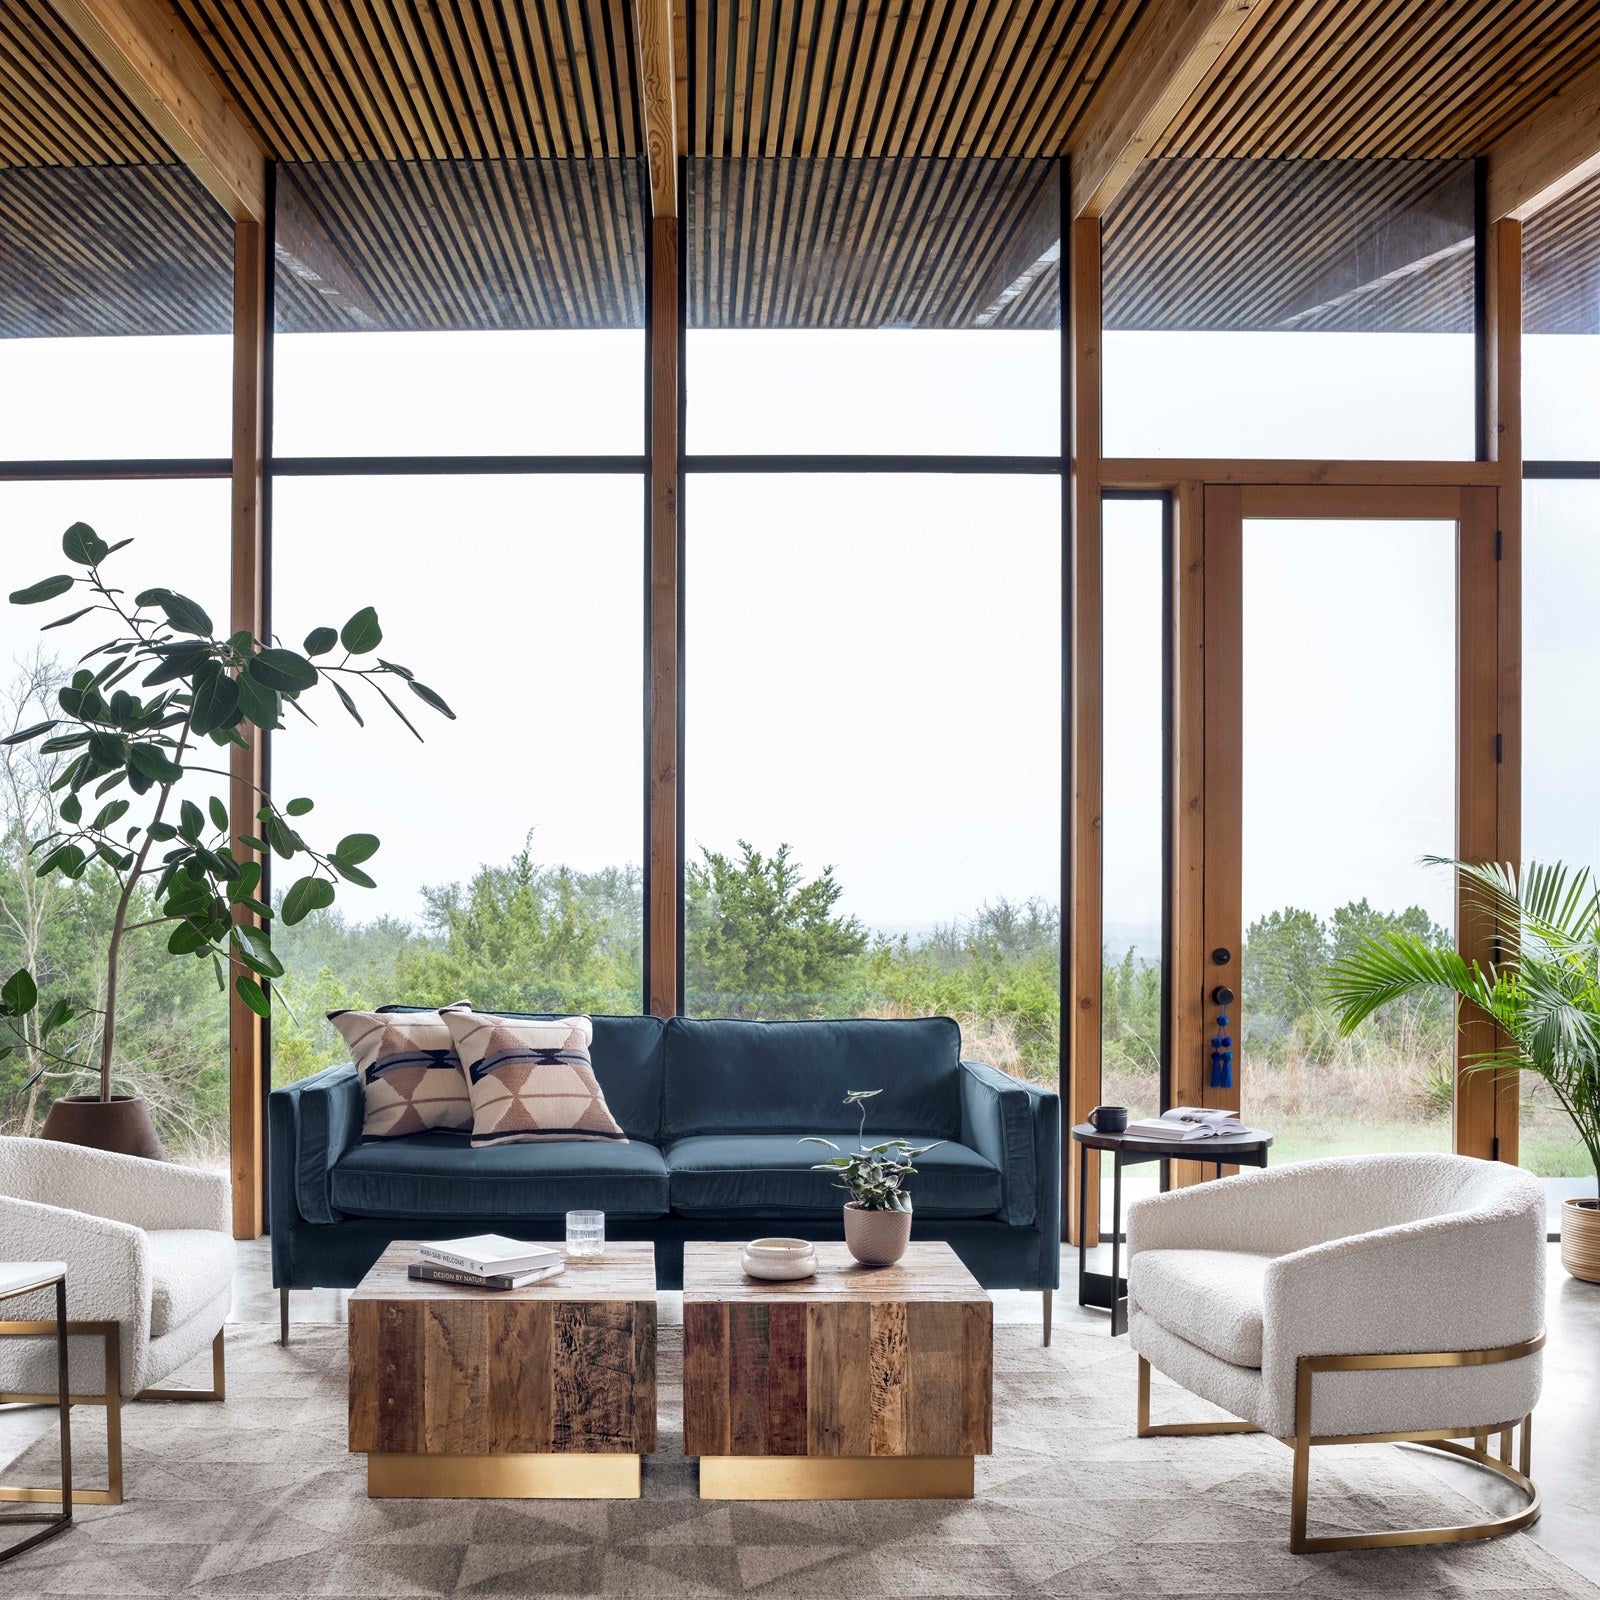 A stylish living room with floor to ceiling windows with a garden view, in the room two white accent chairs with golden details, a blue sofa and two cube tables with golden details, some green plants bring the outside garden in.